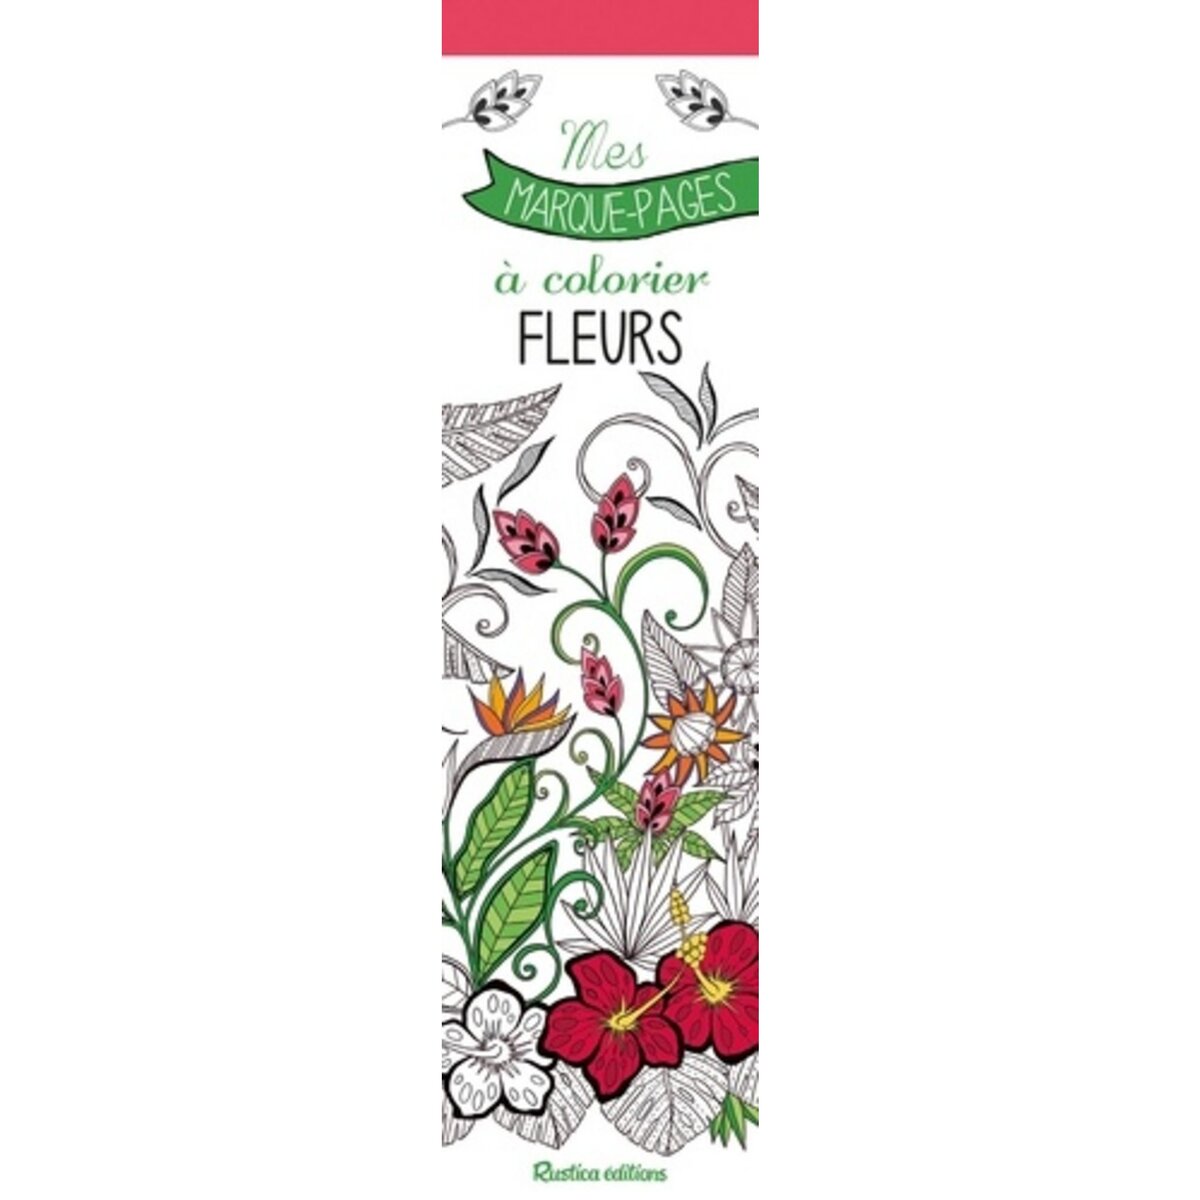  FLEURS. MES MARQUE-PAGES A COLORIER, Zottino Marica